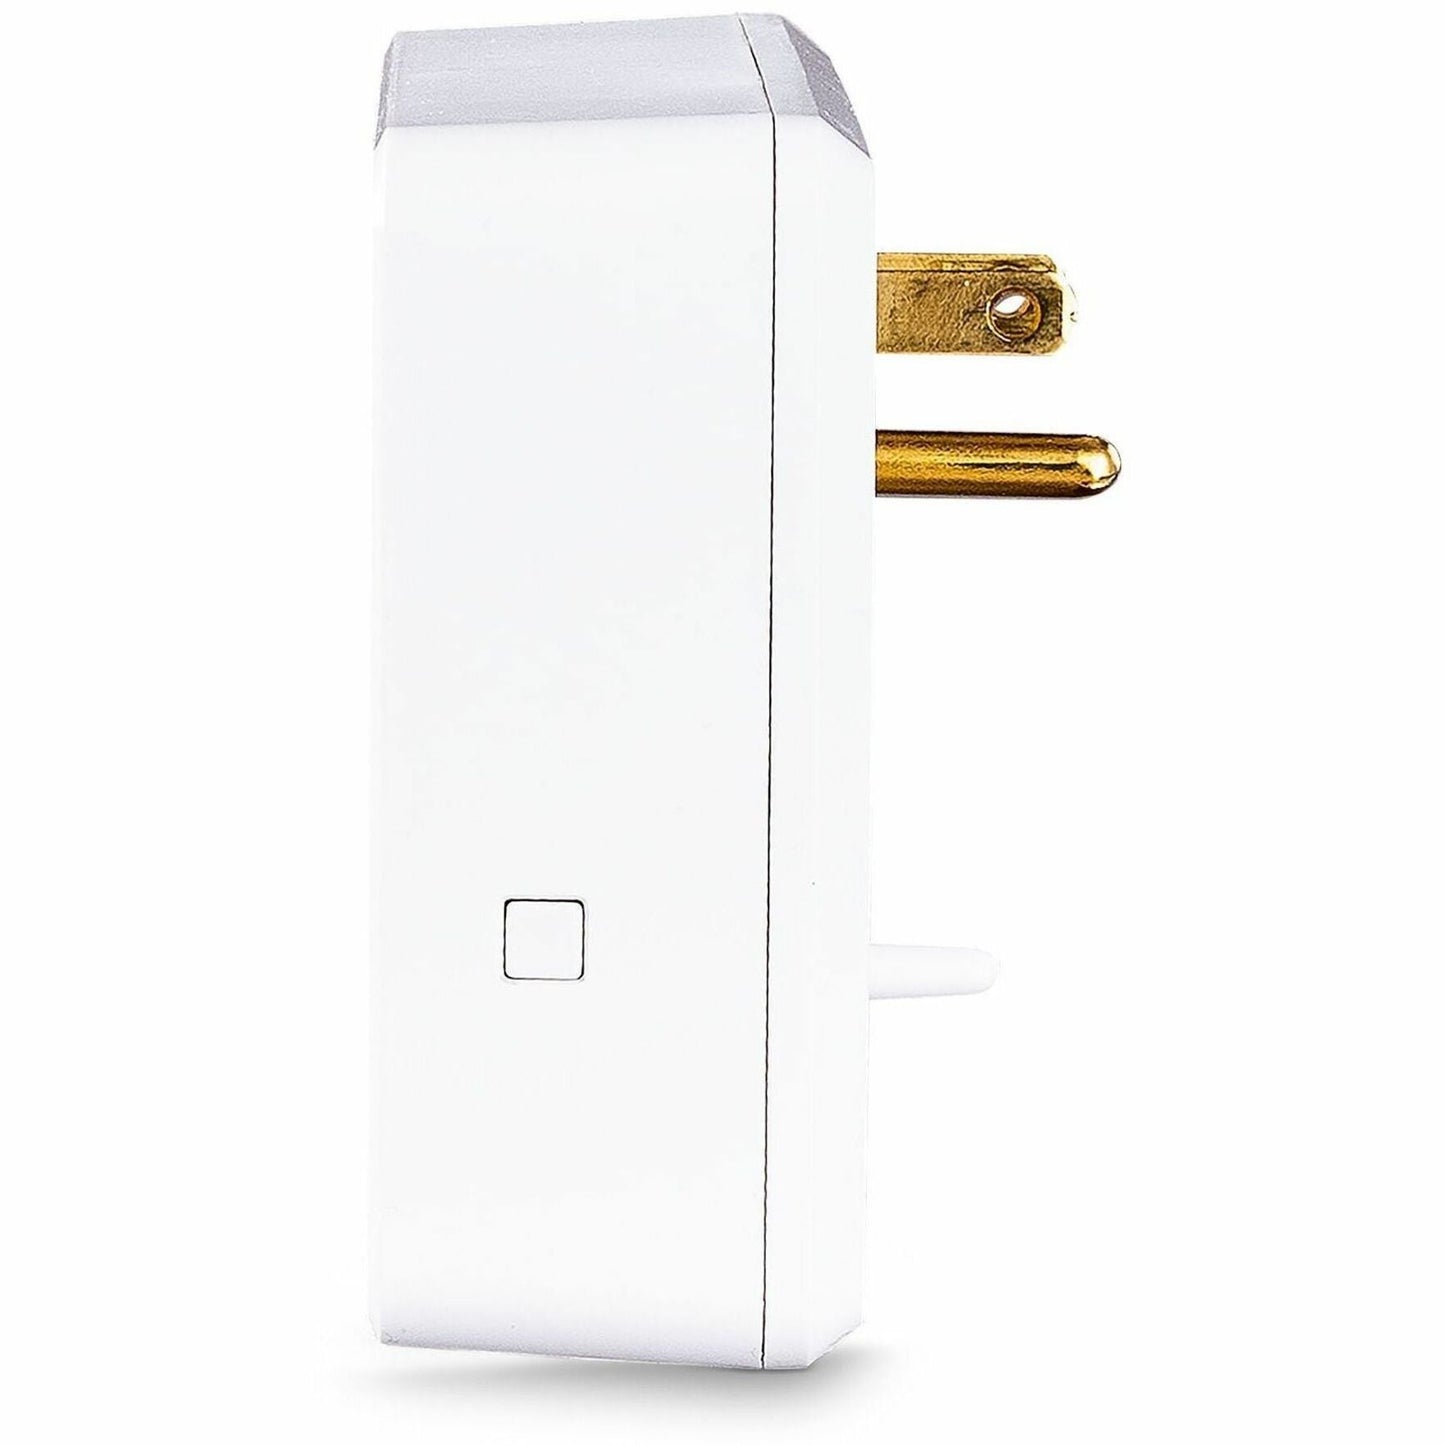 CyberPower P3WUN Wall Tap Outlet